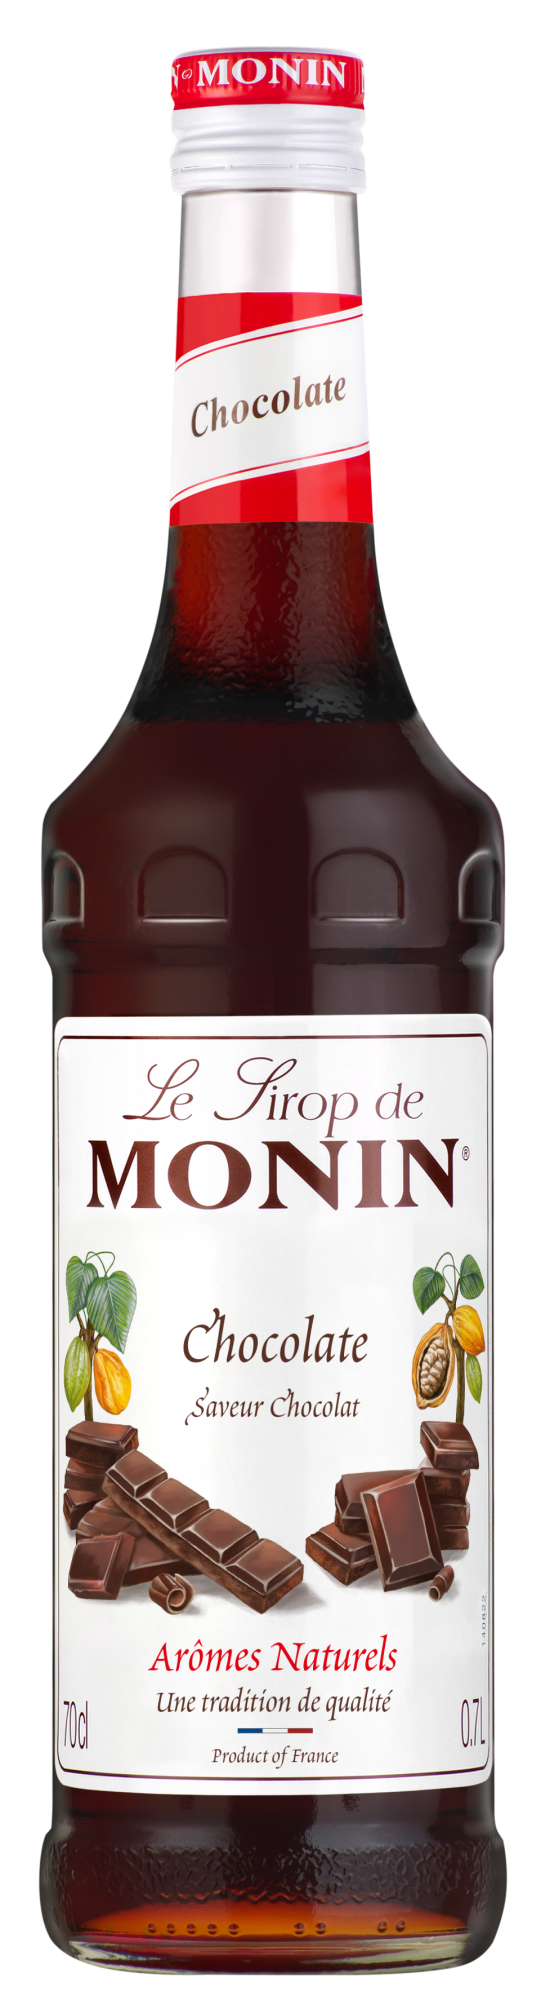 Buy MONIN Chocolate Syrup. It has the unmistakable rich indulgent tones associated with high quality chocolate.